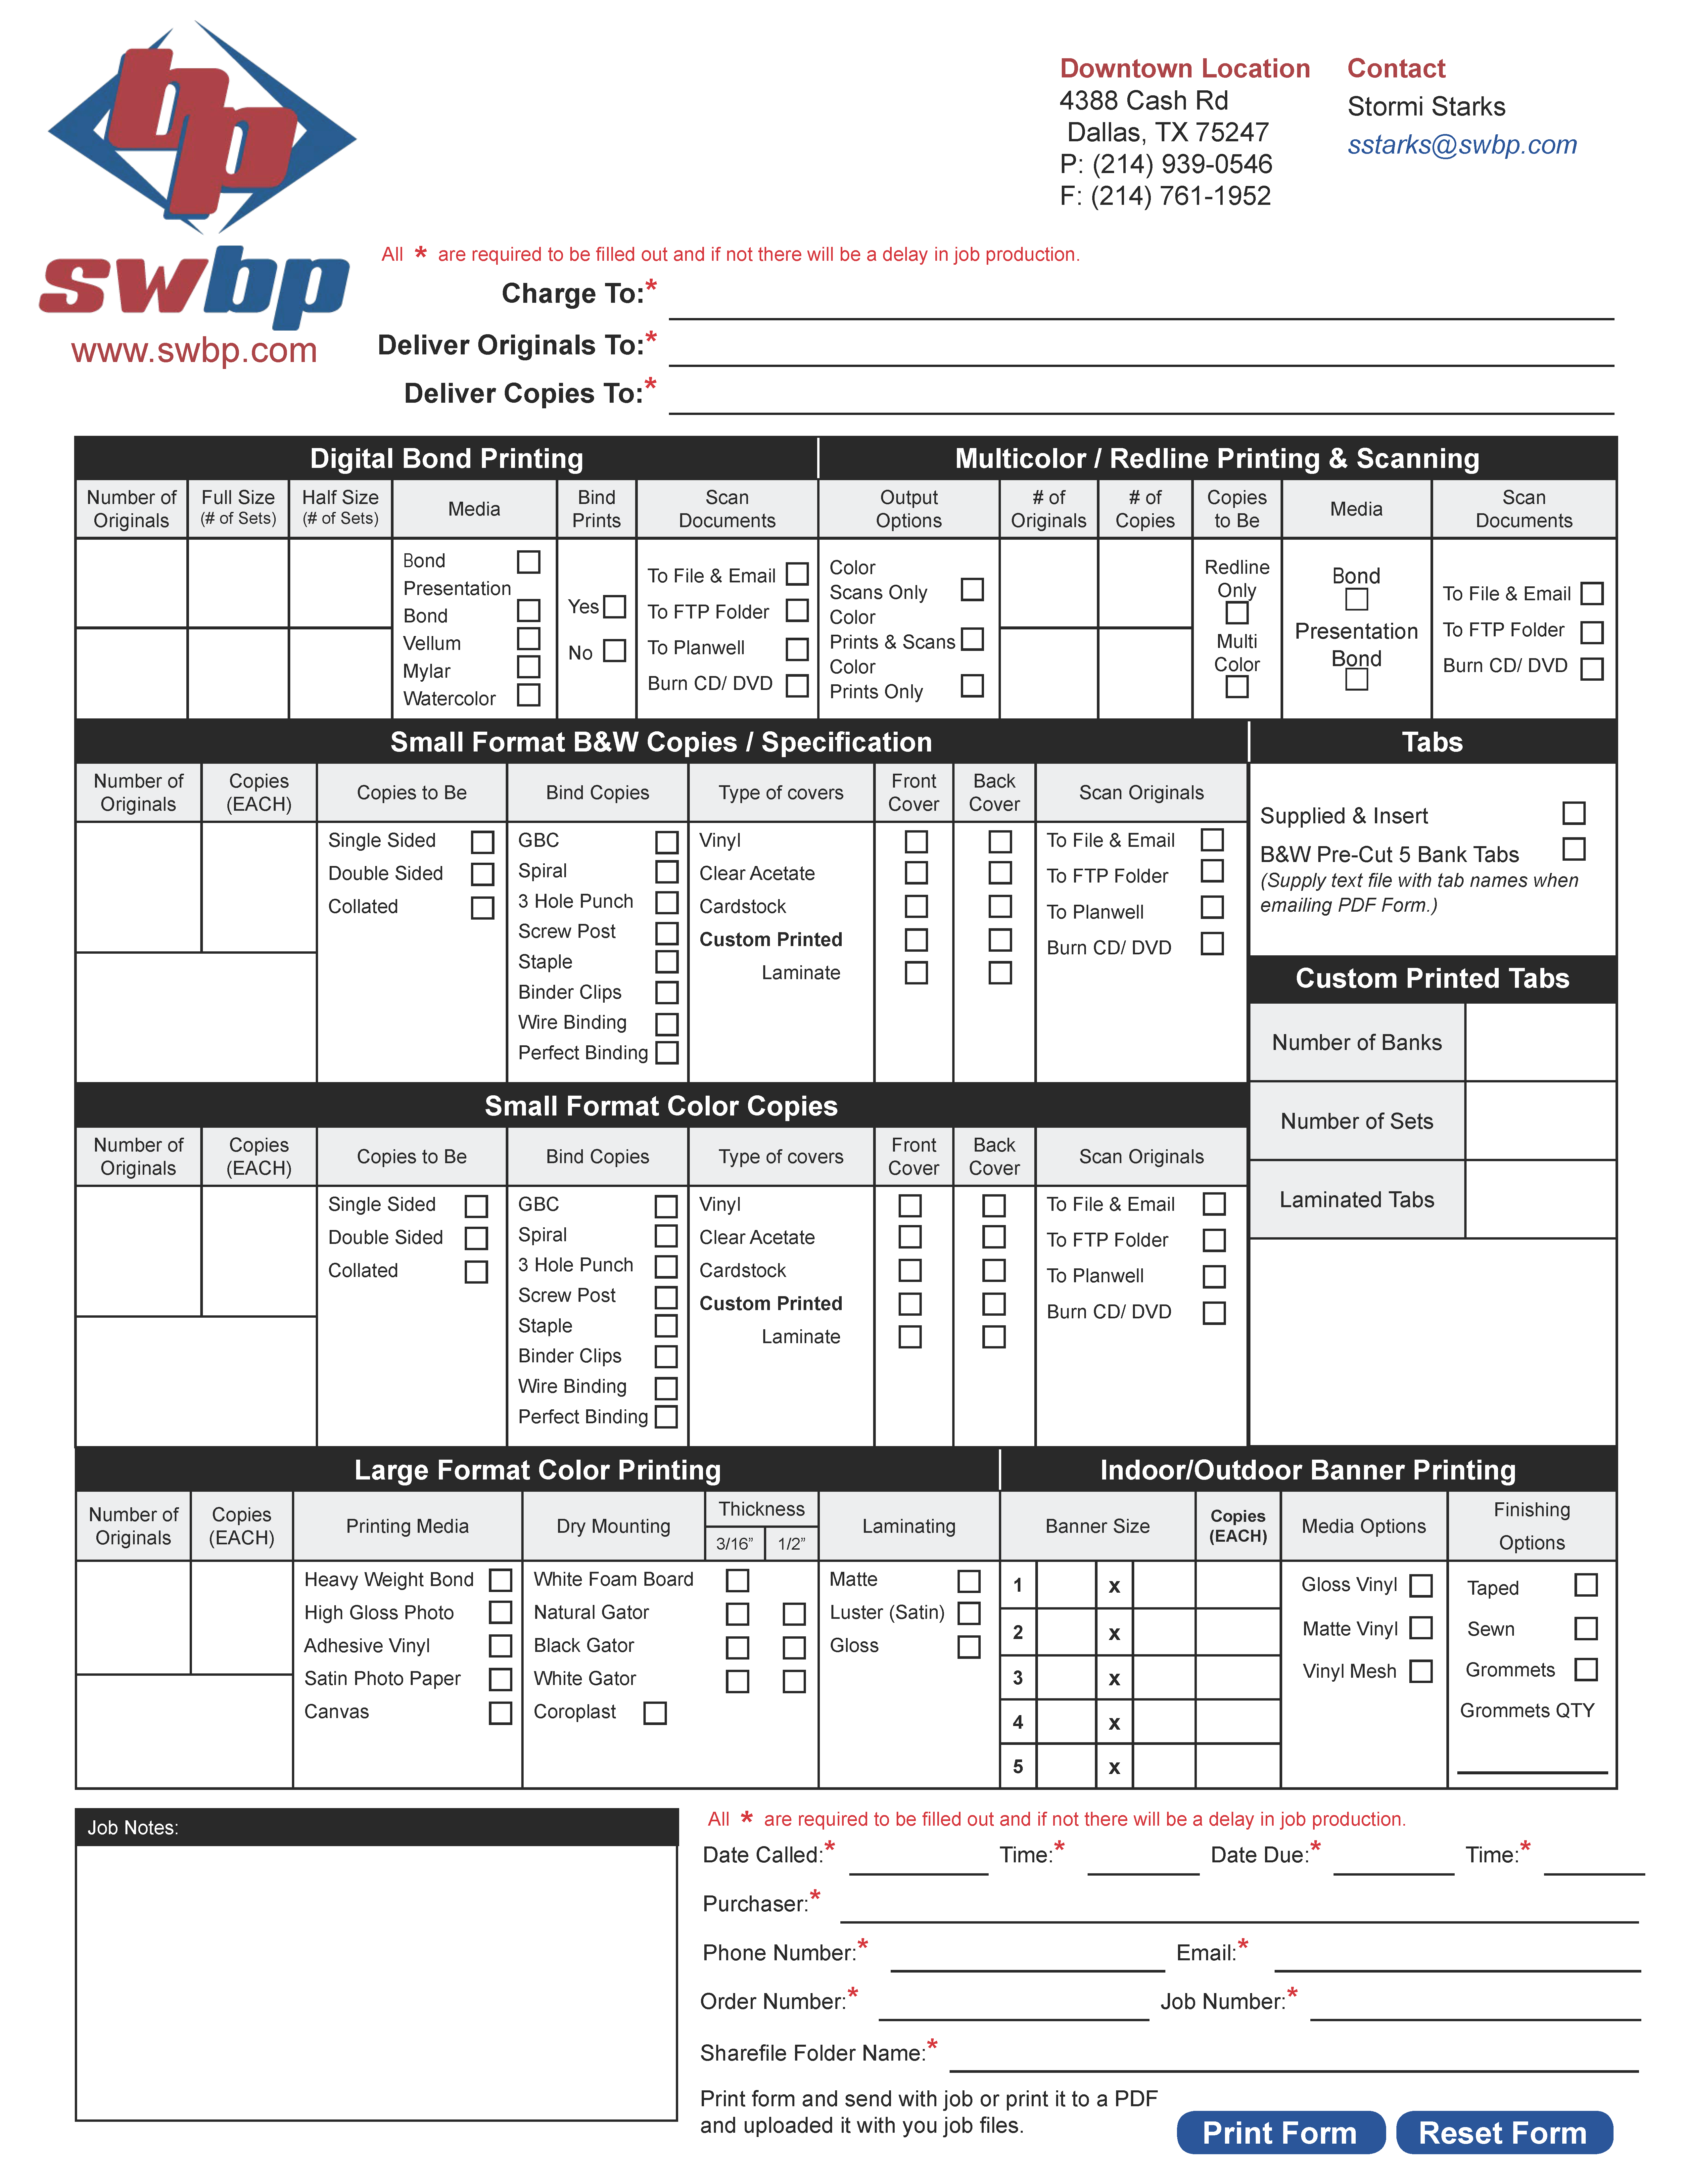 SWBP-Downtown-Online-Form